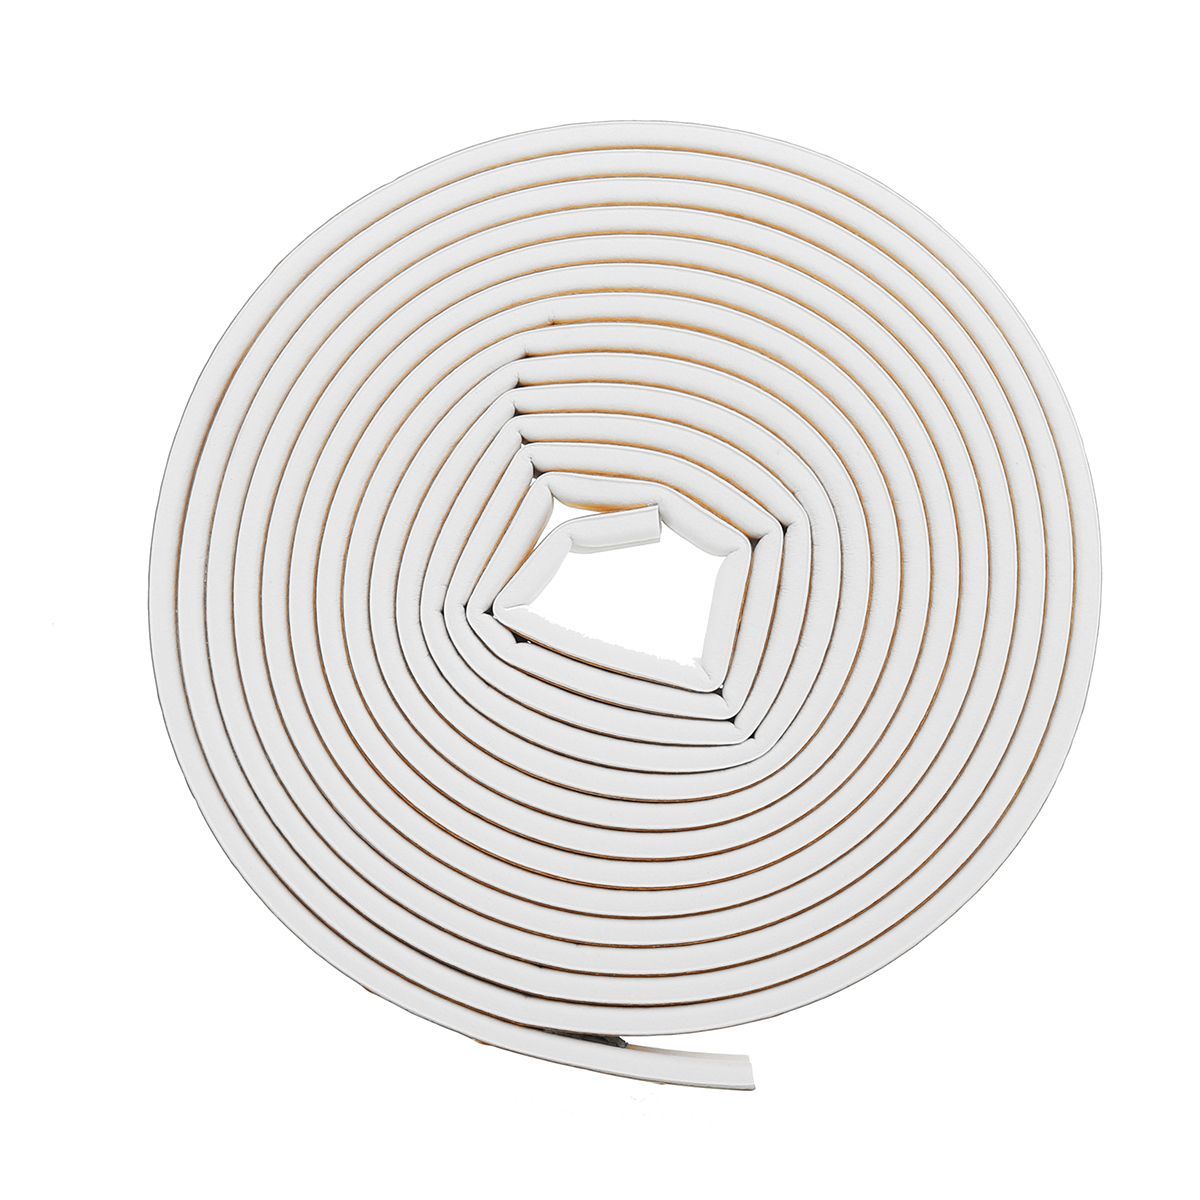 10M-Self-adhesive-D-Type-Seal-Strip-Soundproof-Doors-Windows-Weather-Foam-Adhesive-Tape-Decorations-1537561